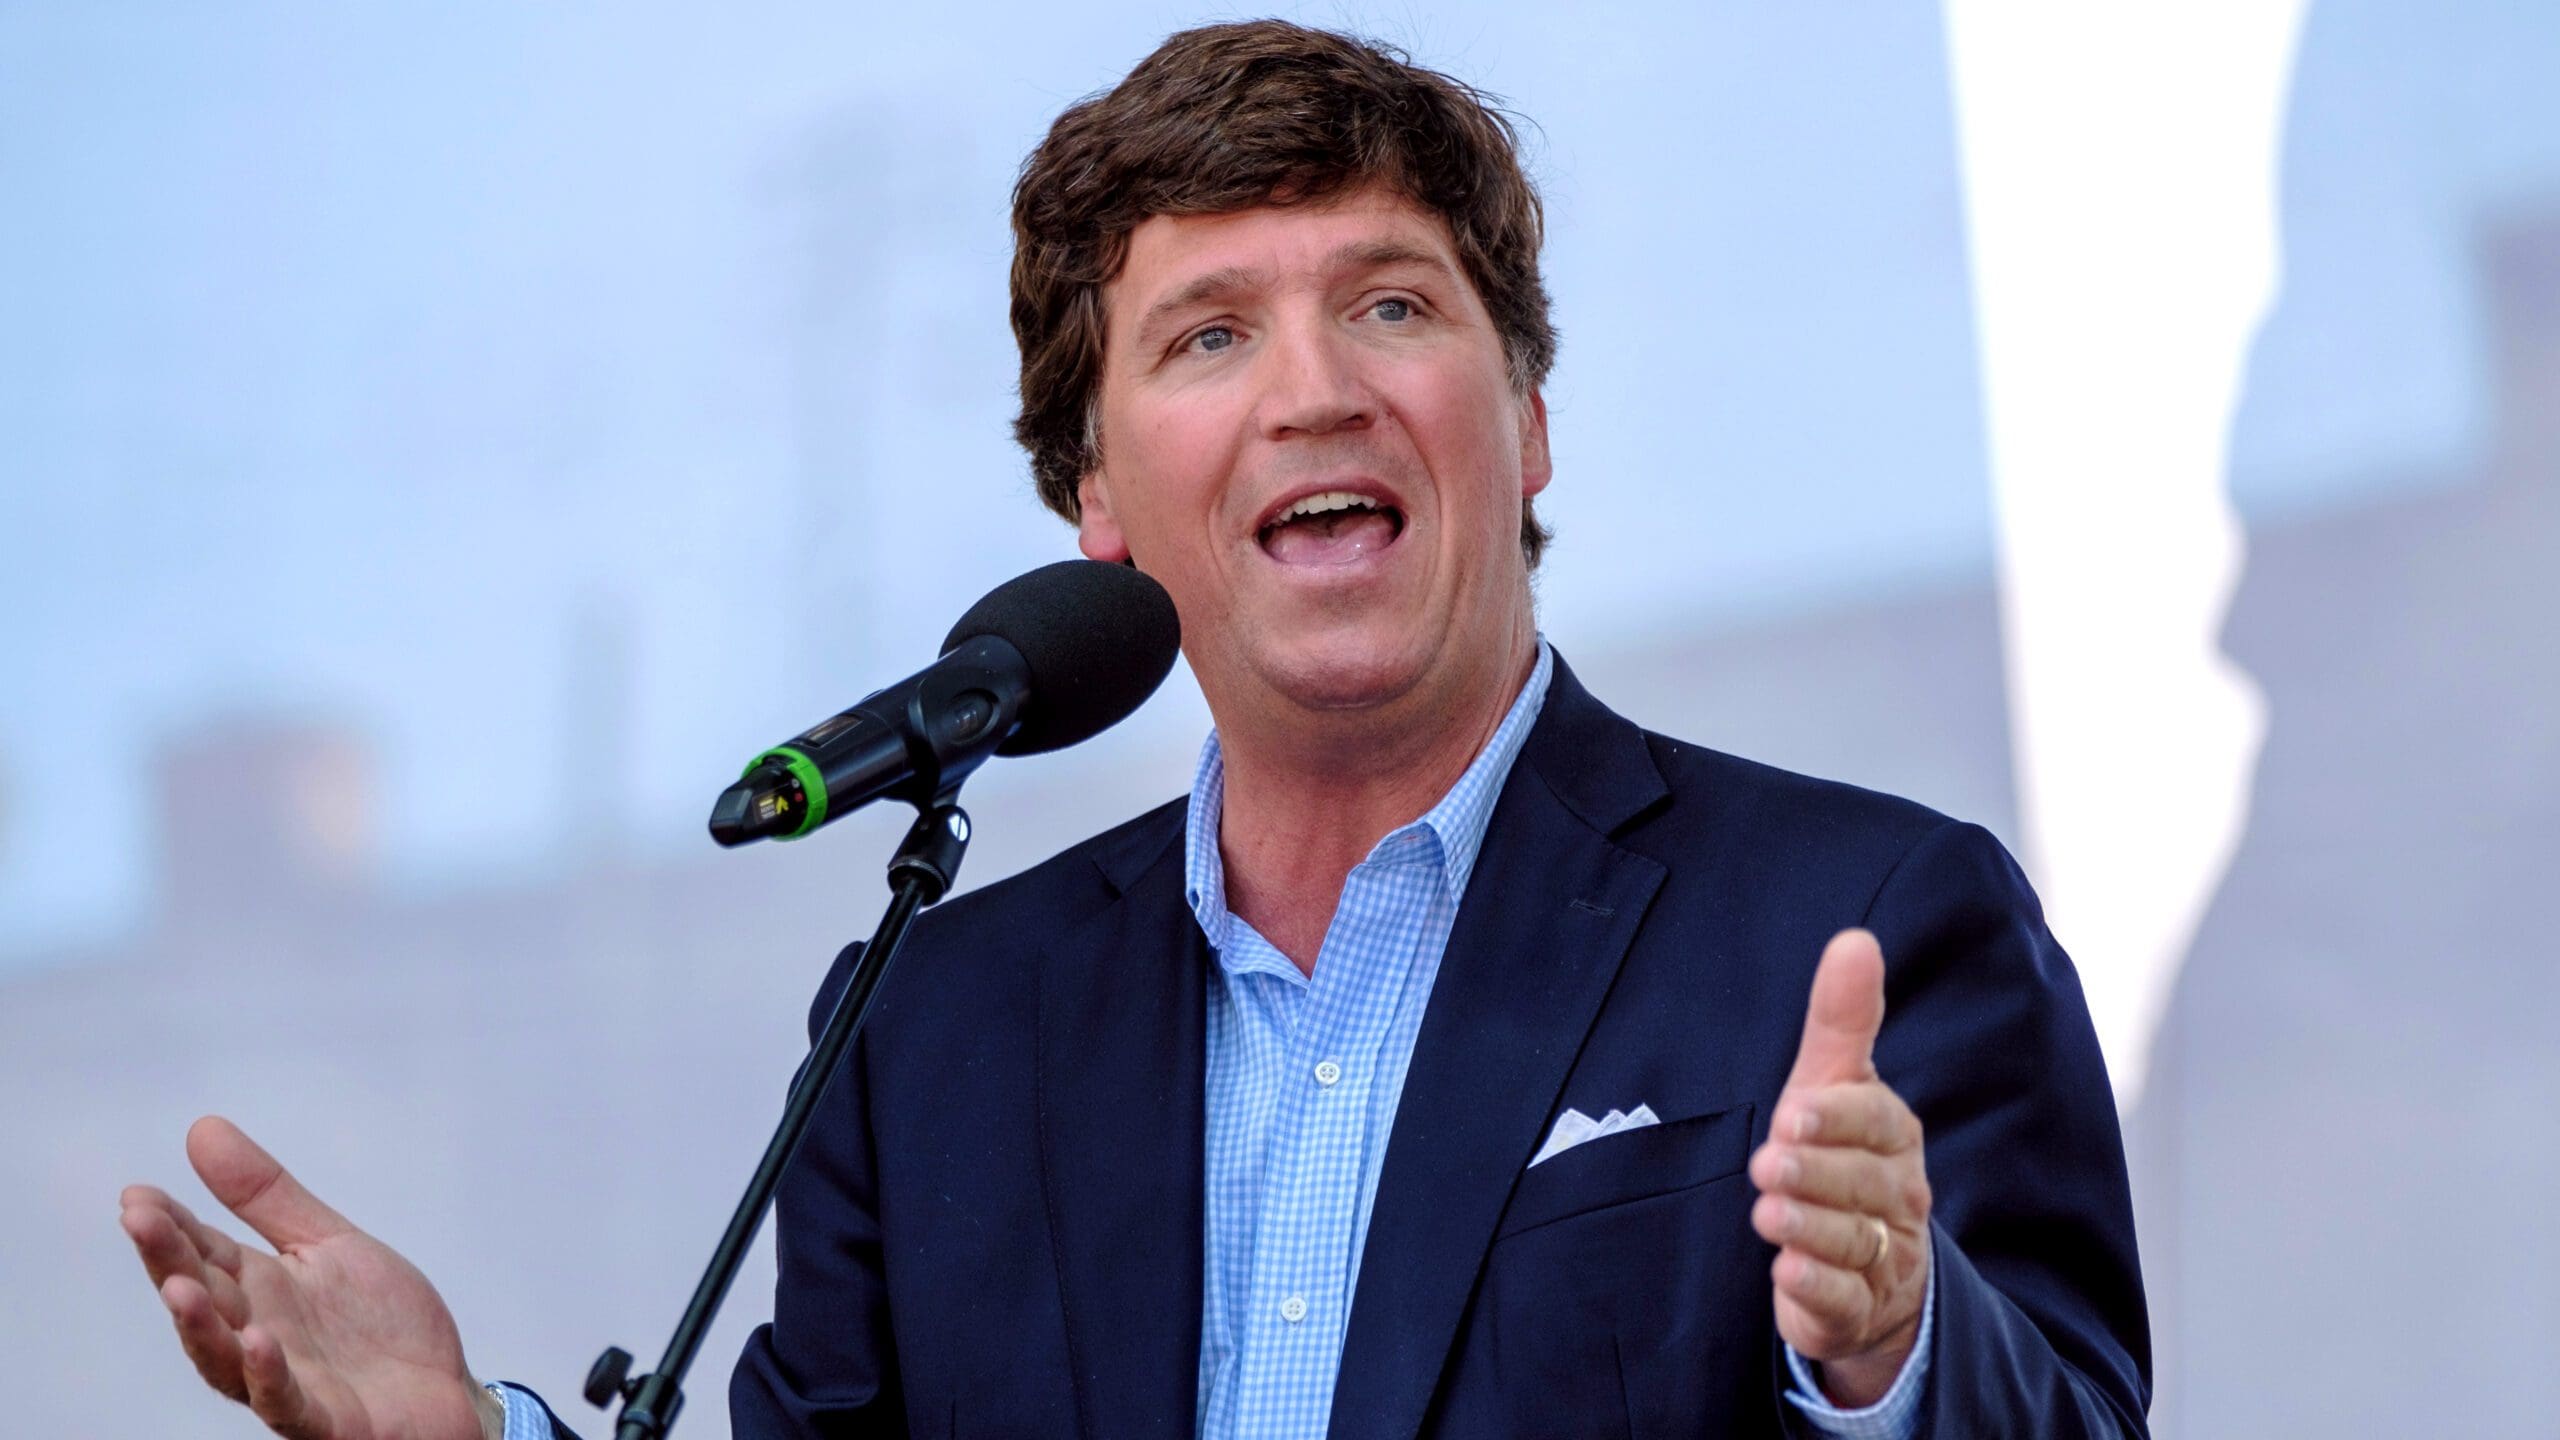 tucker-carlson-explains-why-leftists-‘think-they’re-god’-over-their-response-to-hurricane-ian